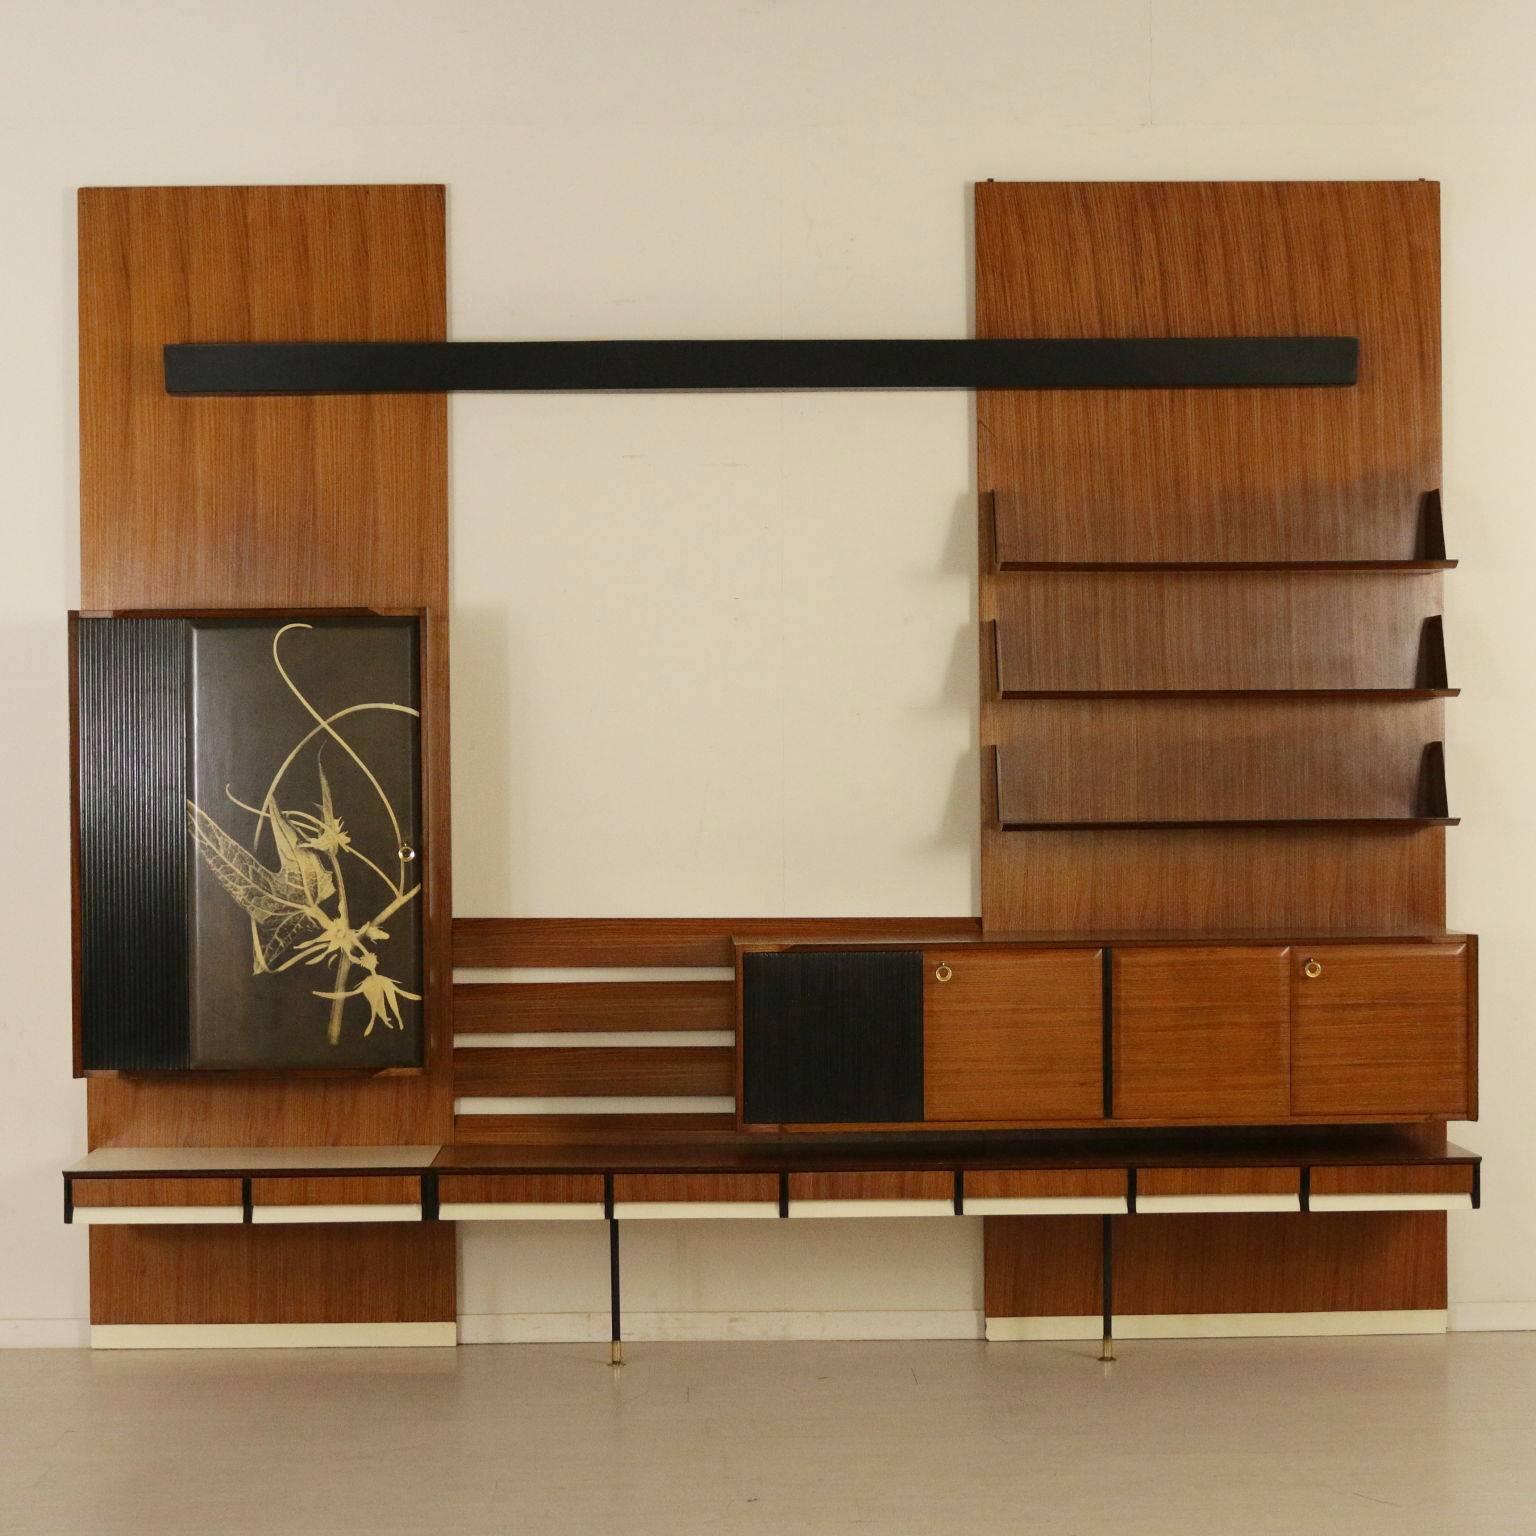 A living room cupboard with hanging containers, rosewood veneer, Formica inserts. Metal legs with brass ferrules, place for lights. Manufactured in Italy, 1960s.